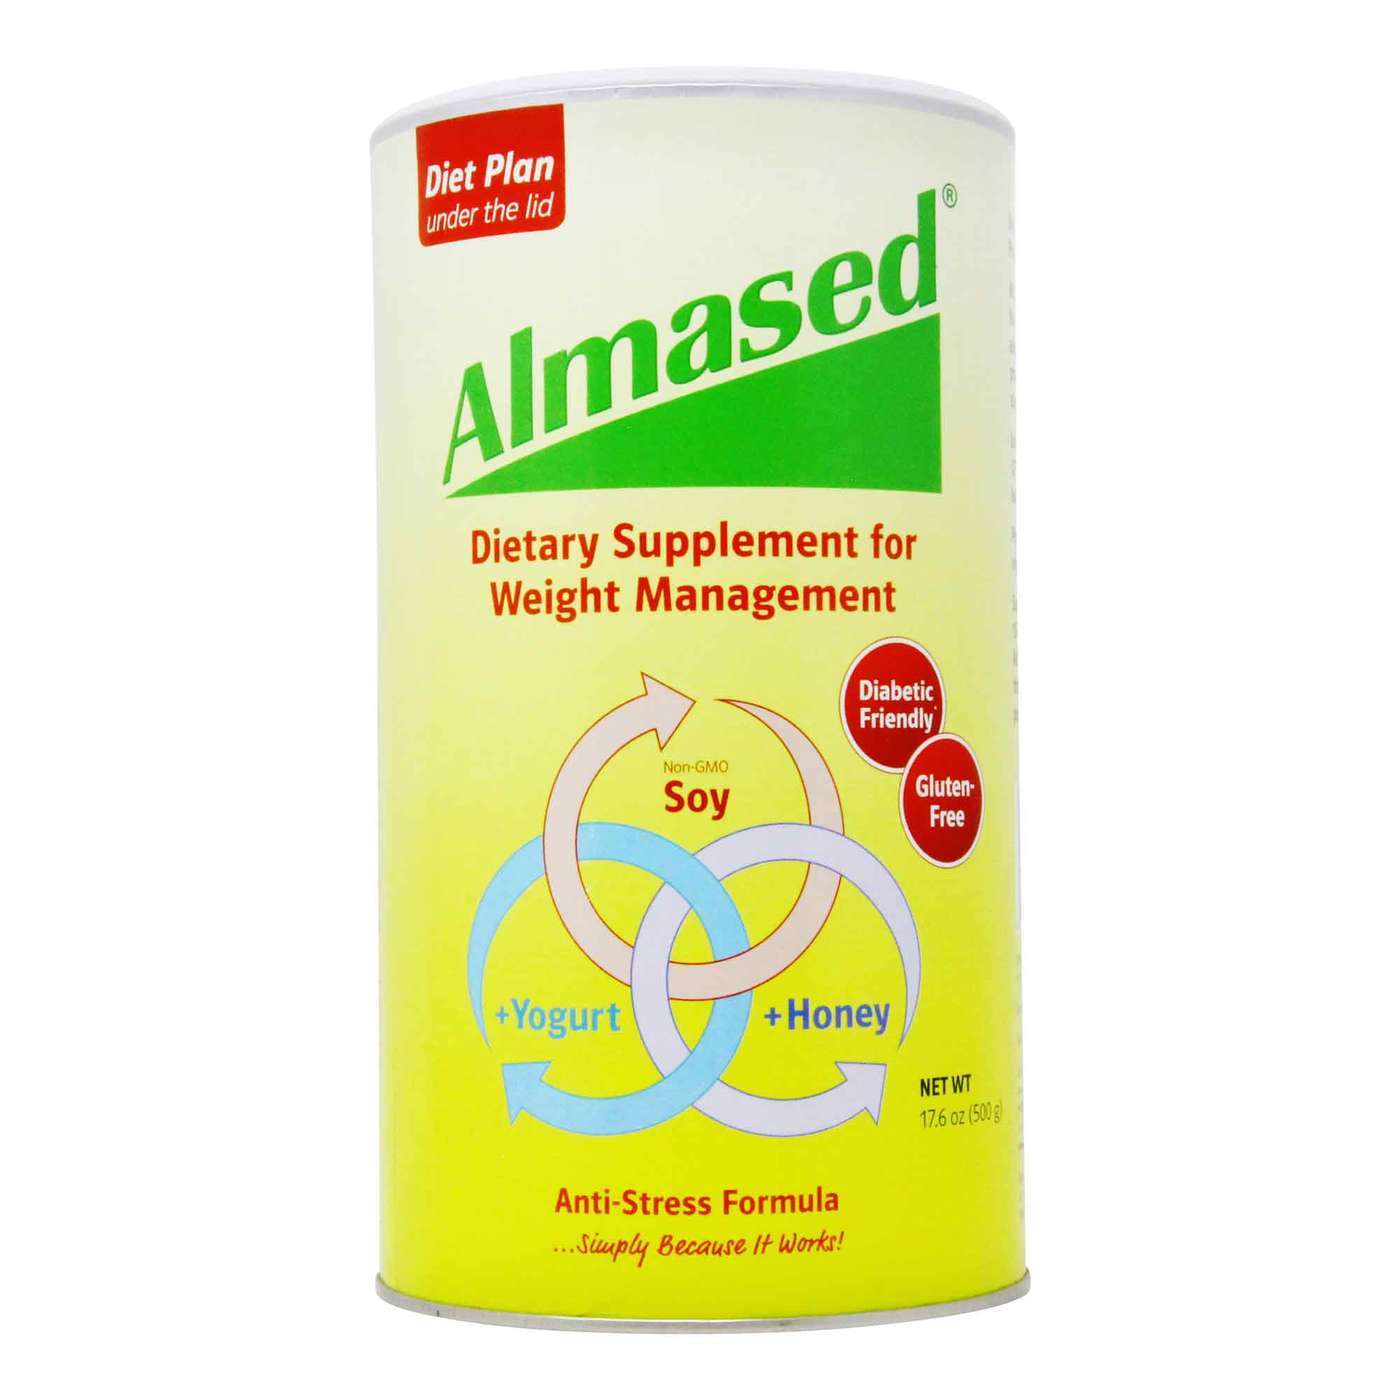 11-almased-nutritional-facts